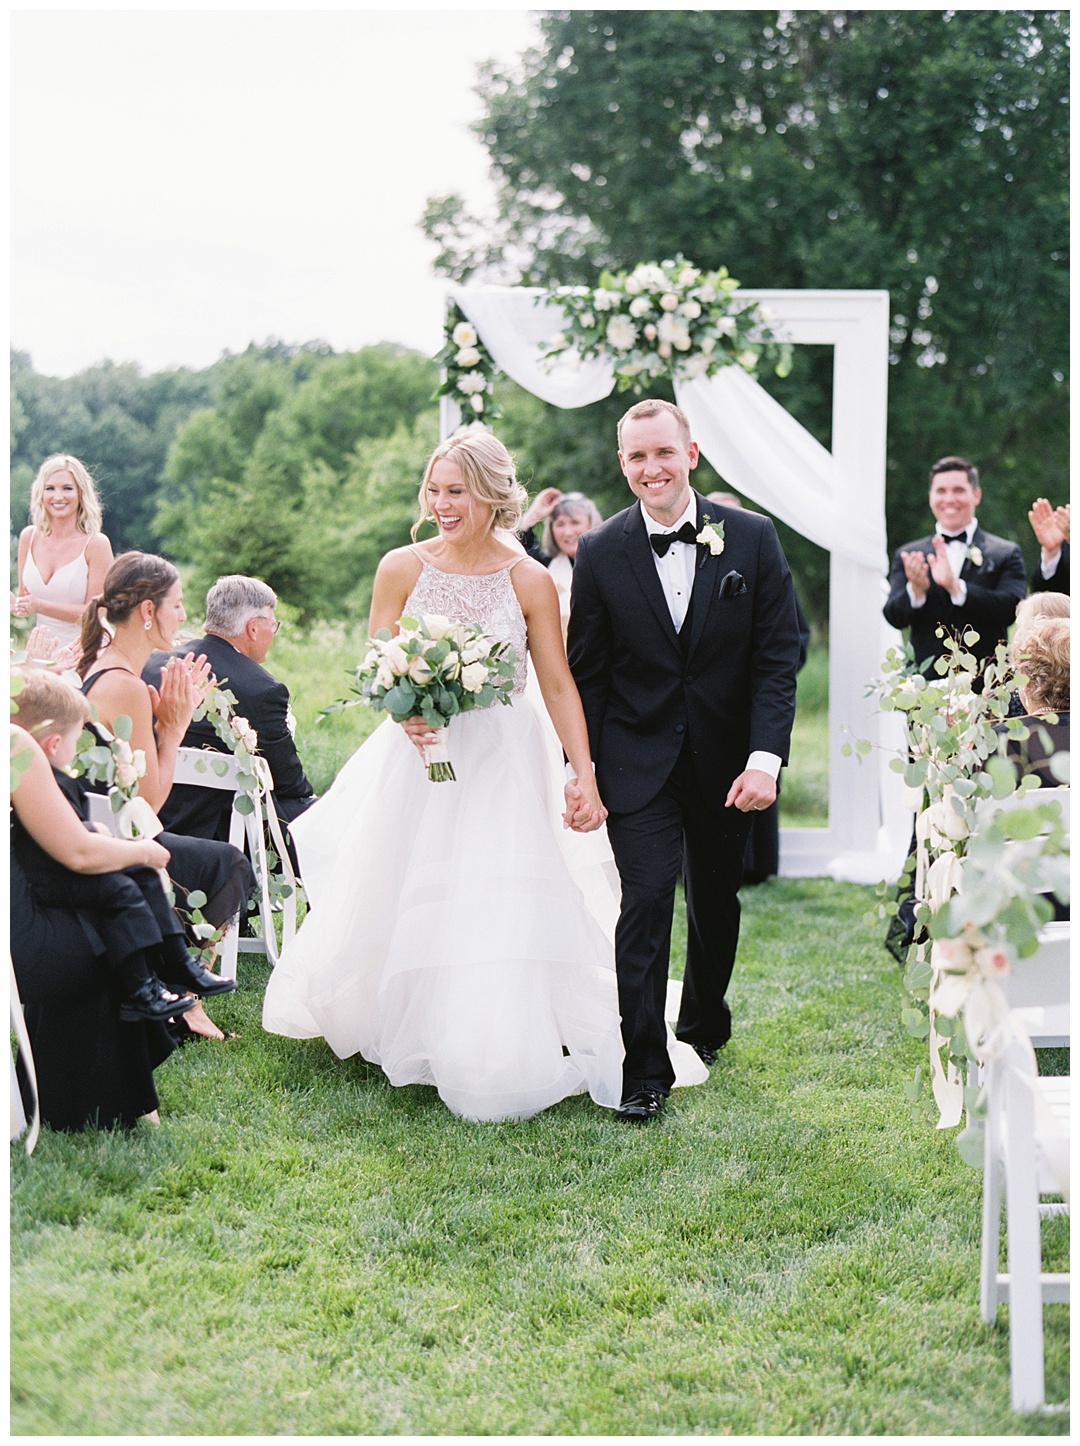 Processional Lush Backyard Wedding on Film Featured on Magnolia Rouge with Sarah Sunstrom Photography